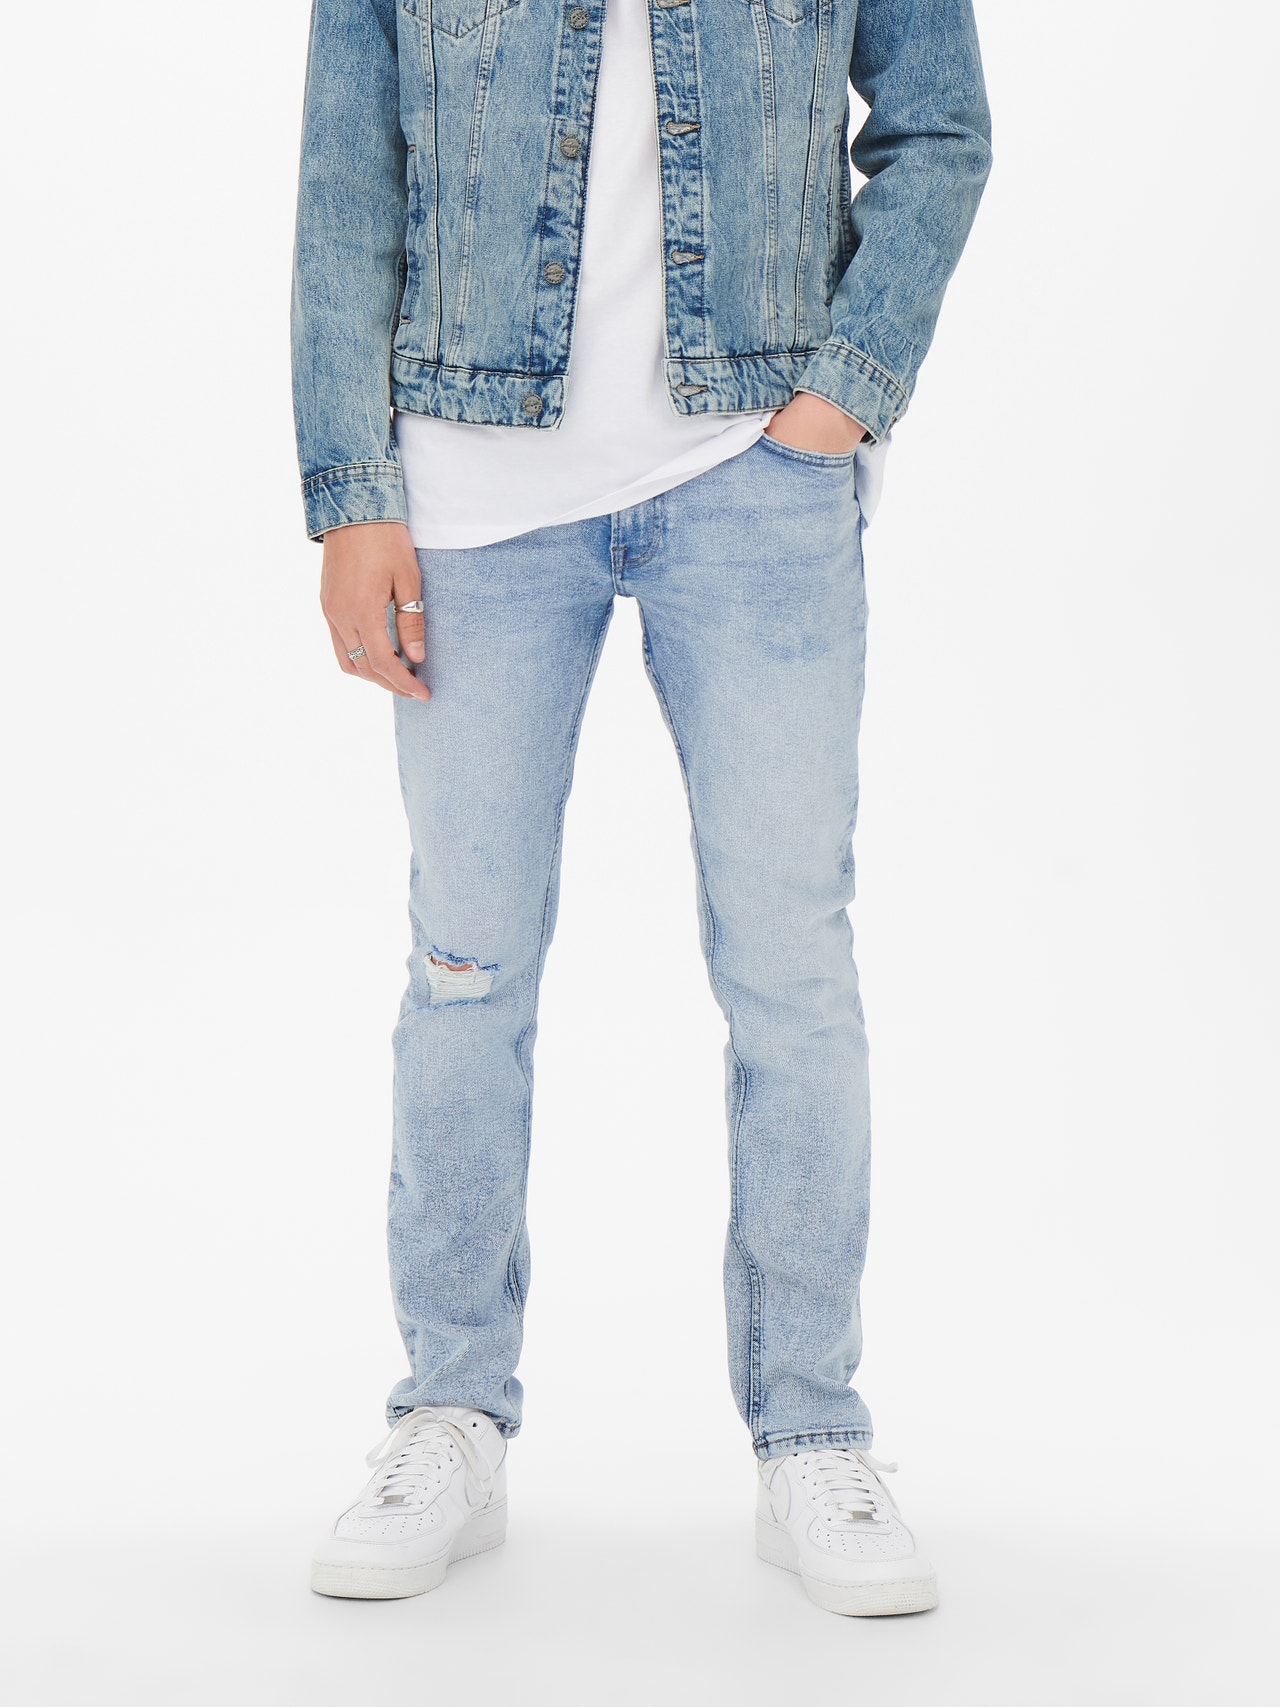 ONLY & SONS Jeans Slim Fit Taille moyenne Ourlé destroy -Blue Denim - 22023922